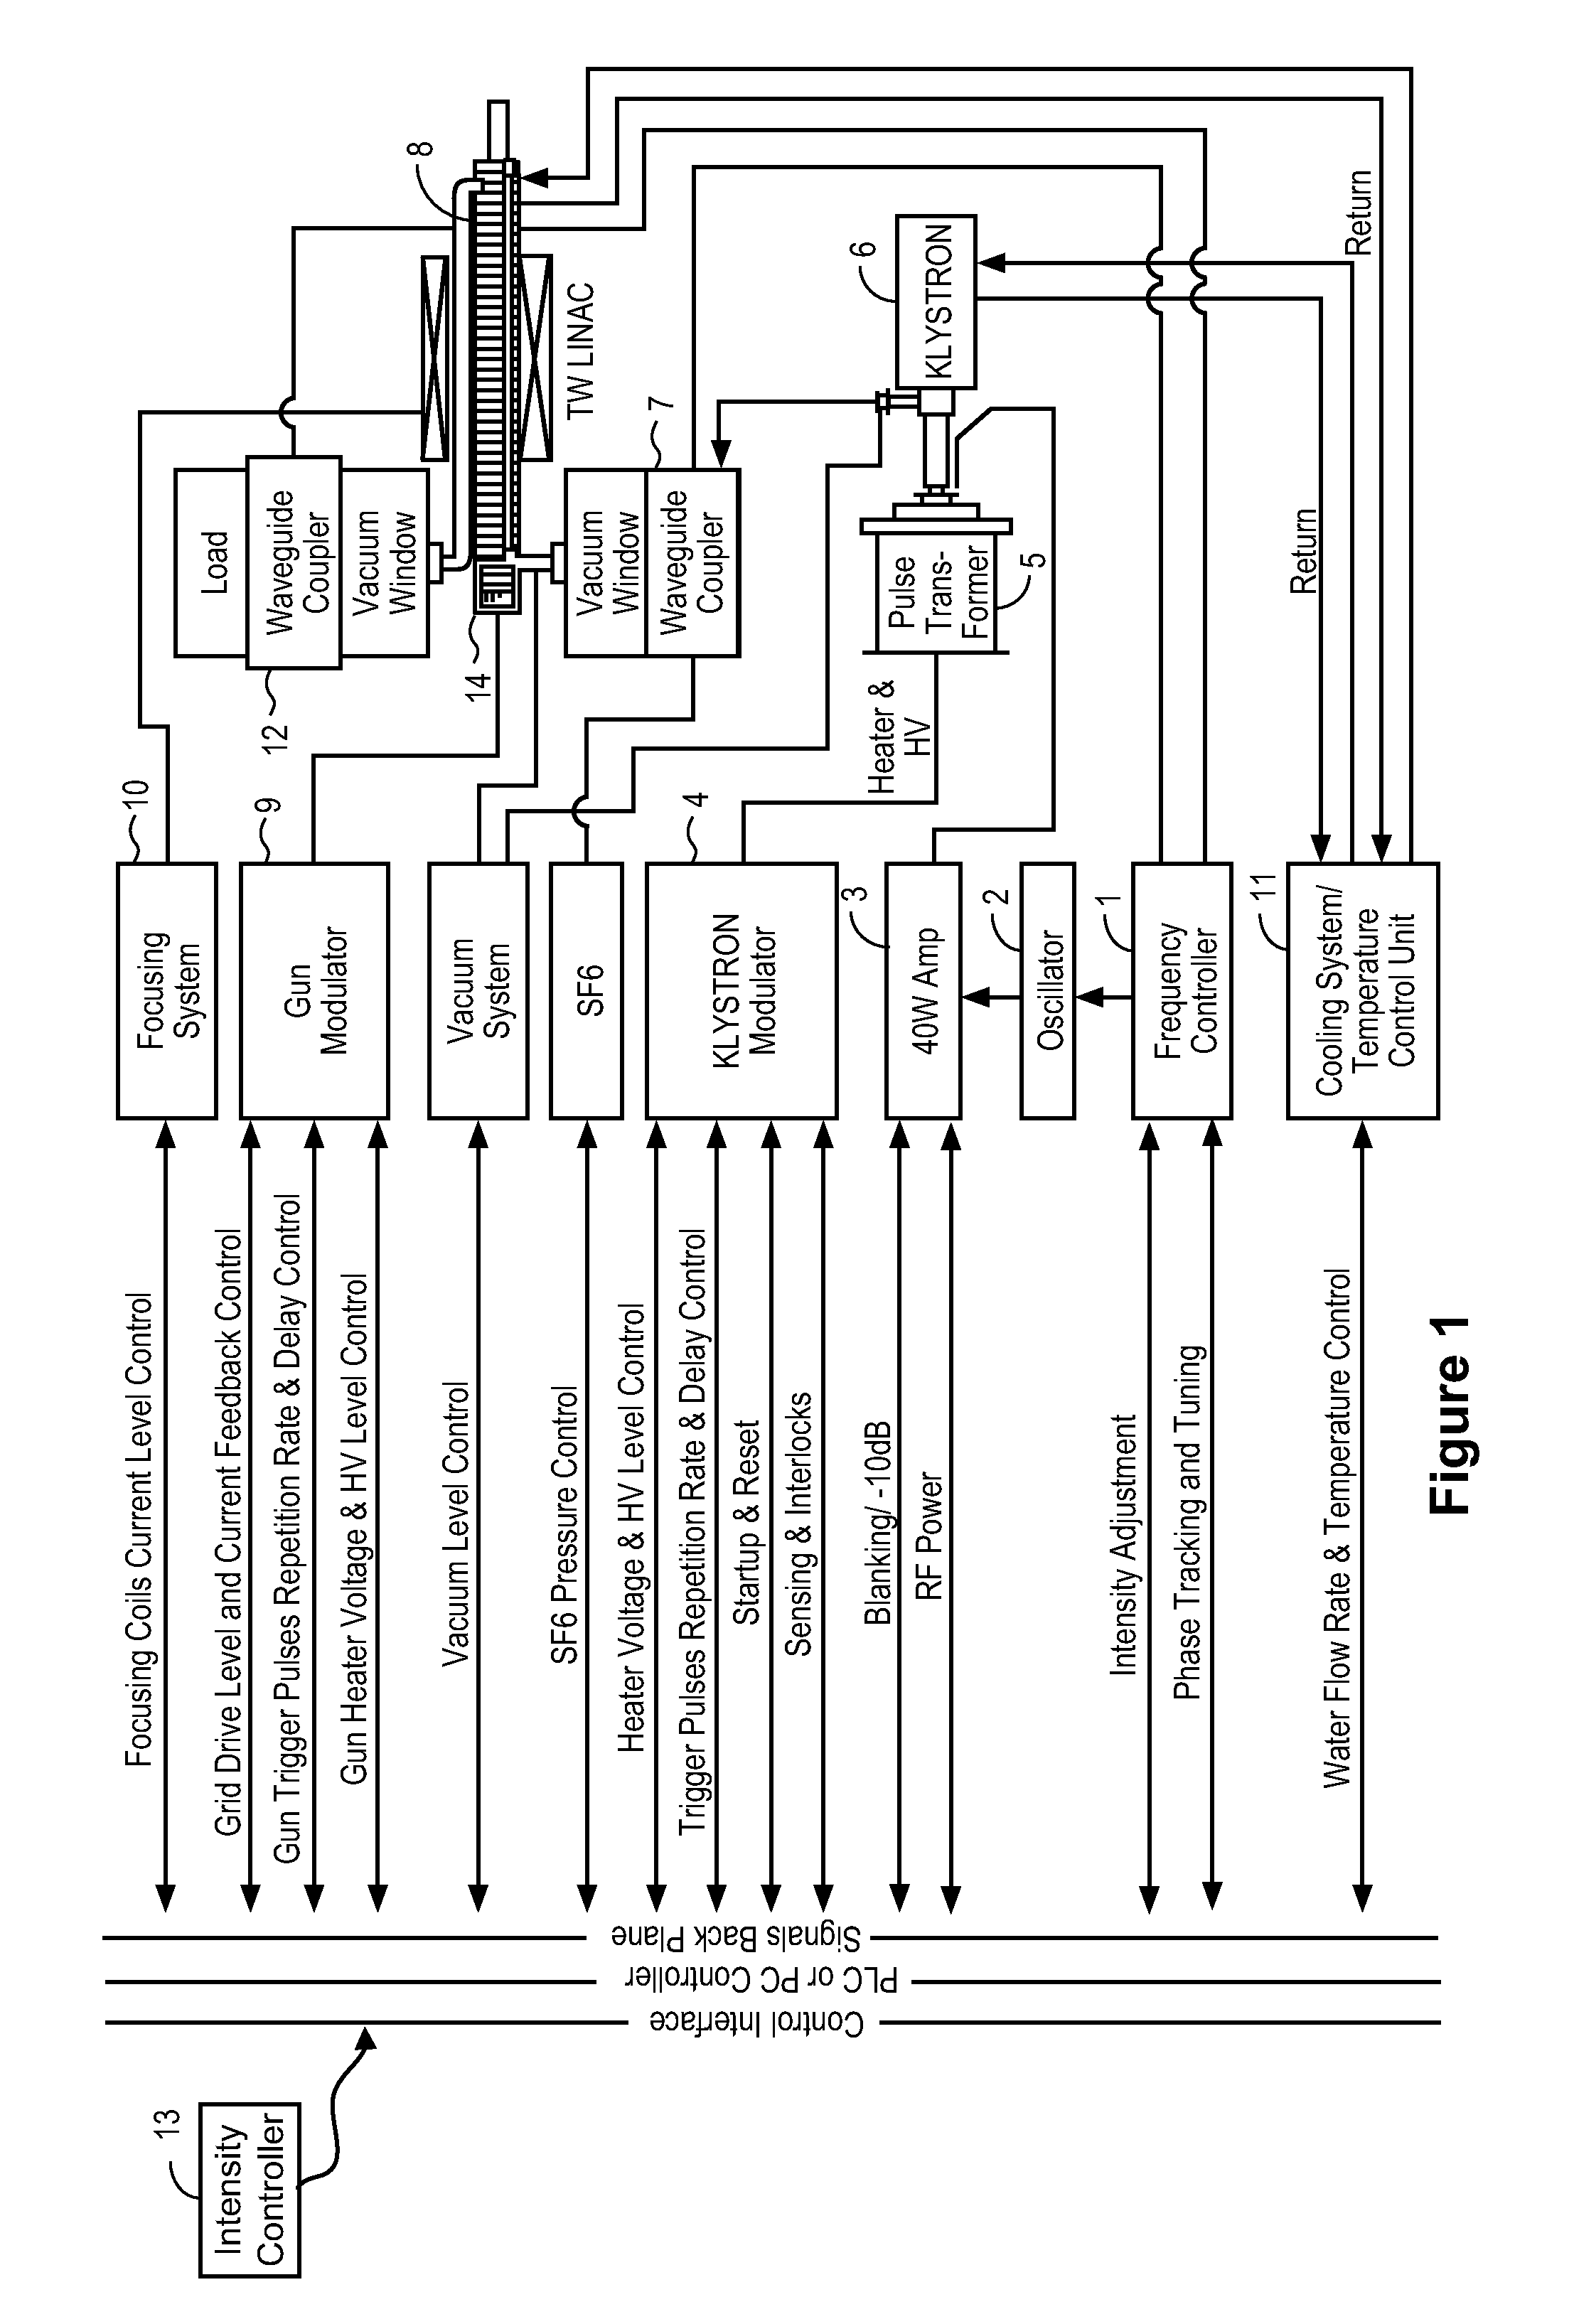 Traveling wave linear accelerator based x-ray source using current to modulate pulse-to-pulse dosage